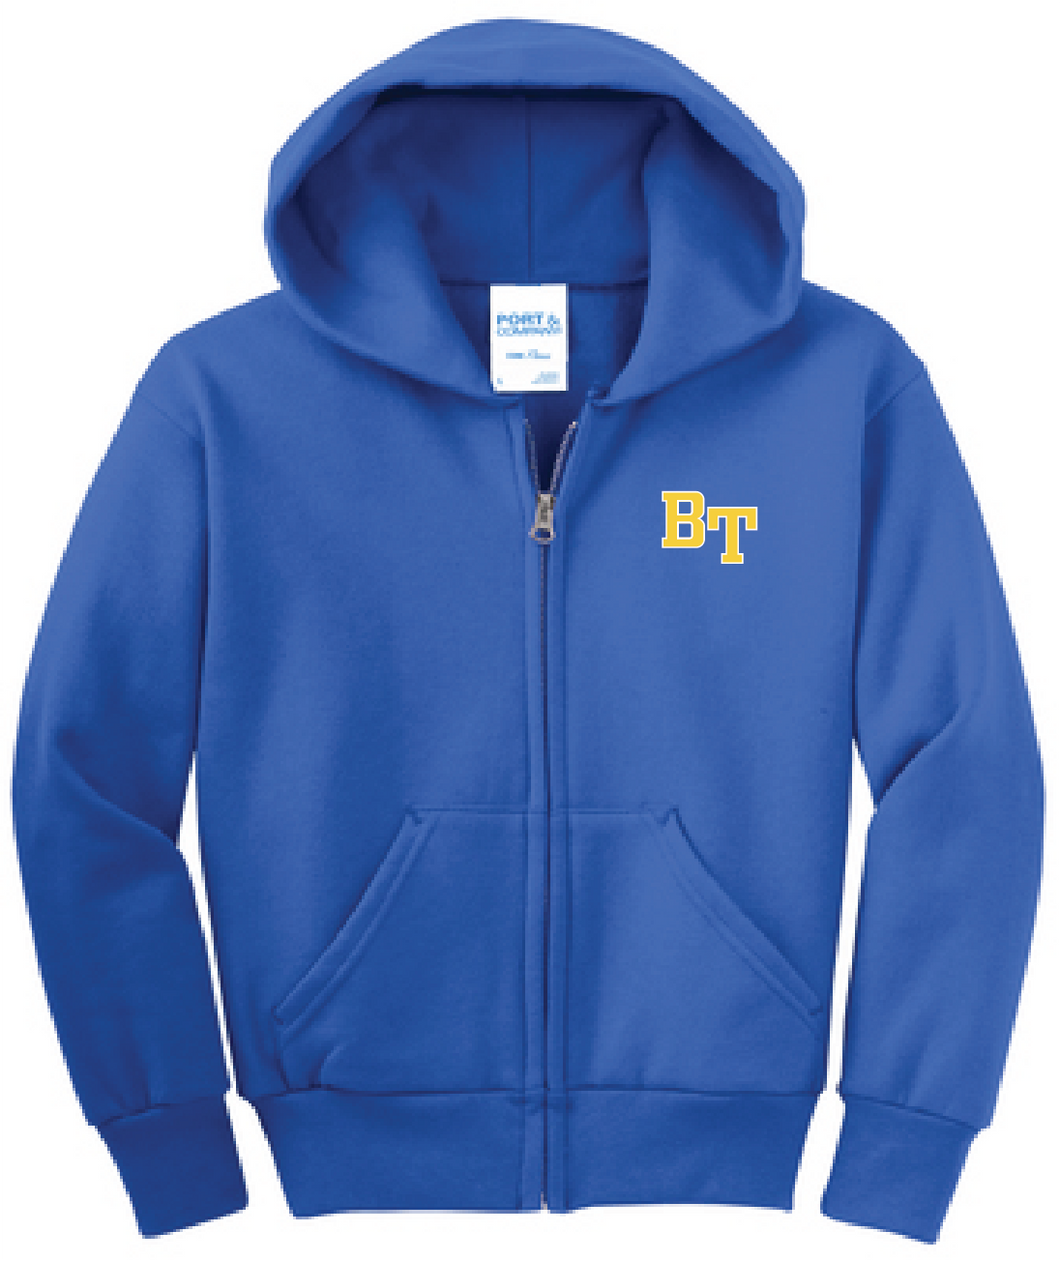 Youth Full Zip Hoodie UNIFORM APPROVED